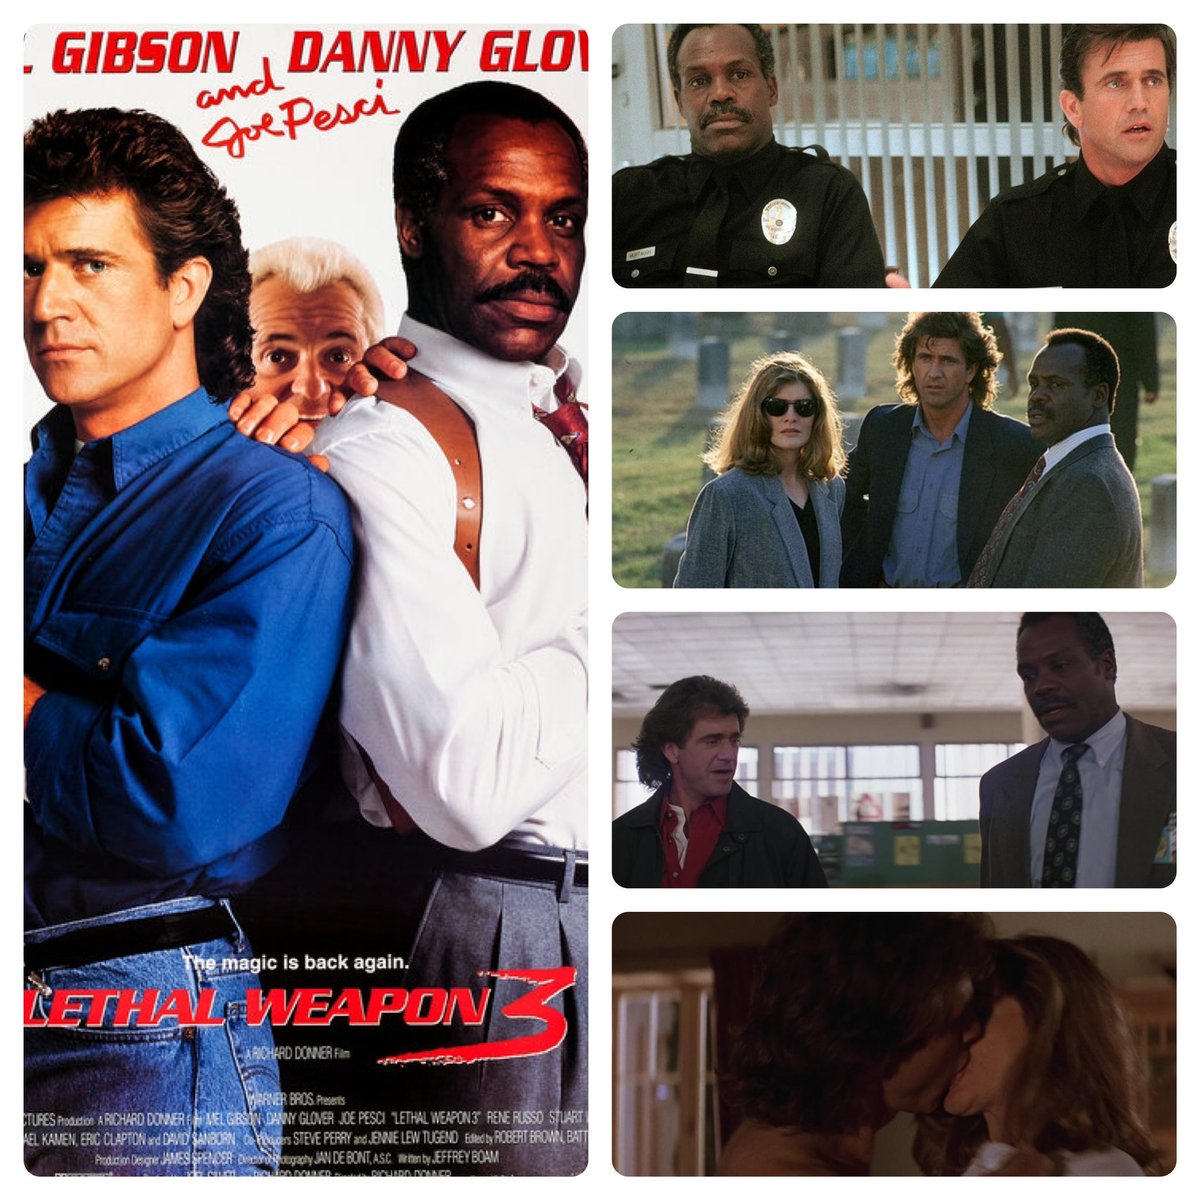 Lethal Weapon 3 celebrates 32nd anniversary today.
#lethalweapon3 #richarddonner #melgibson #melgibsonmovie #melgibsonfan #dannyglover #joepesci #joepescifans #warnerbros #warnerbrosstudios #warnerbrospictures #warnerstudios #warnerbross #warnerbrothers #joelsilver #actionmovies